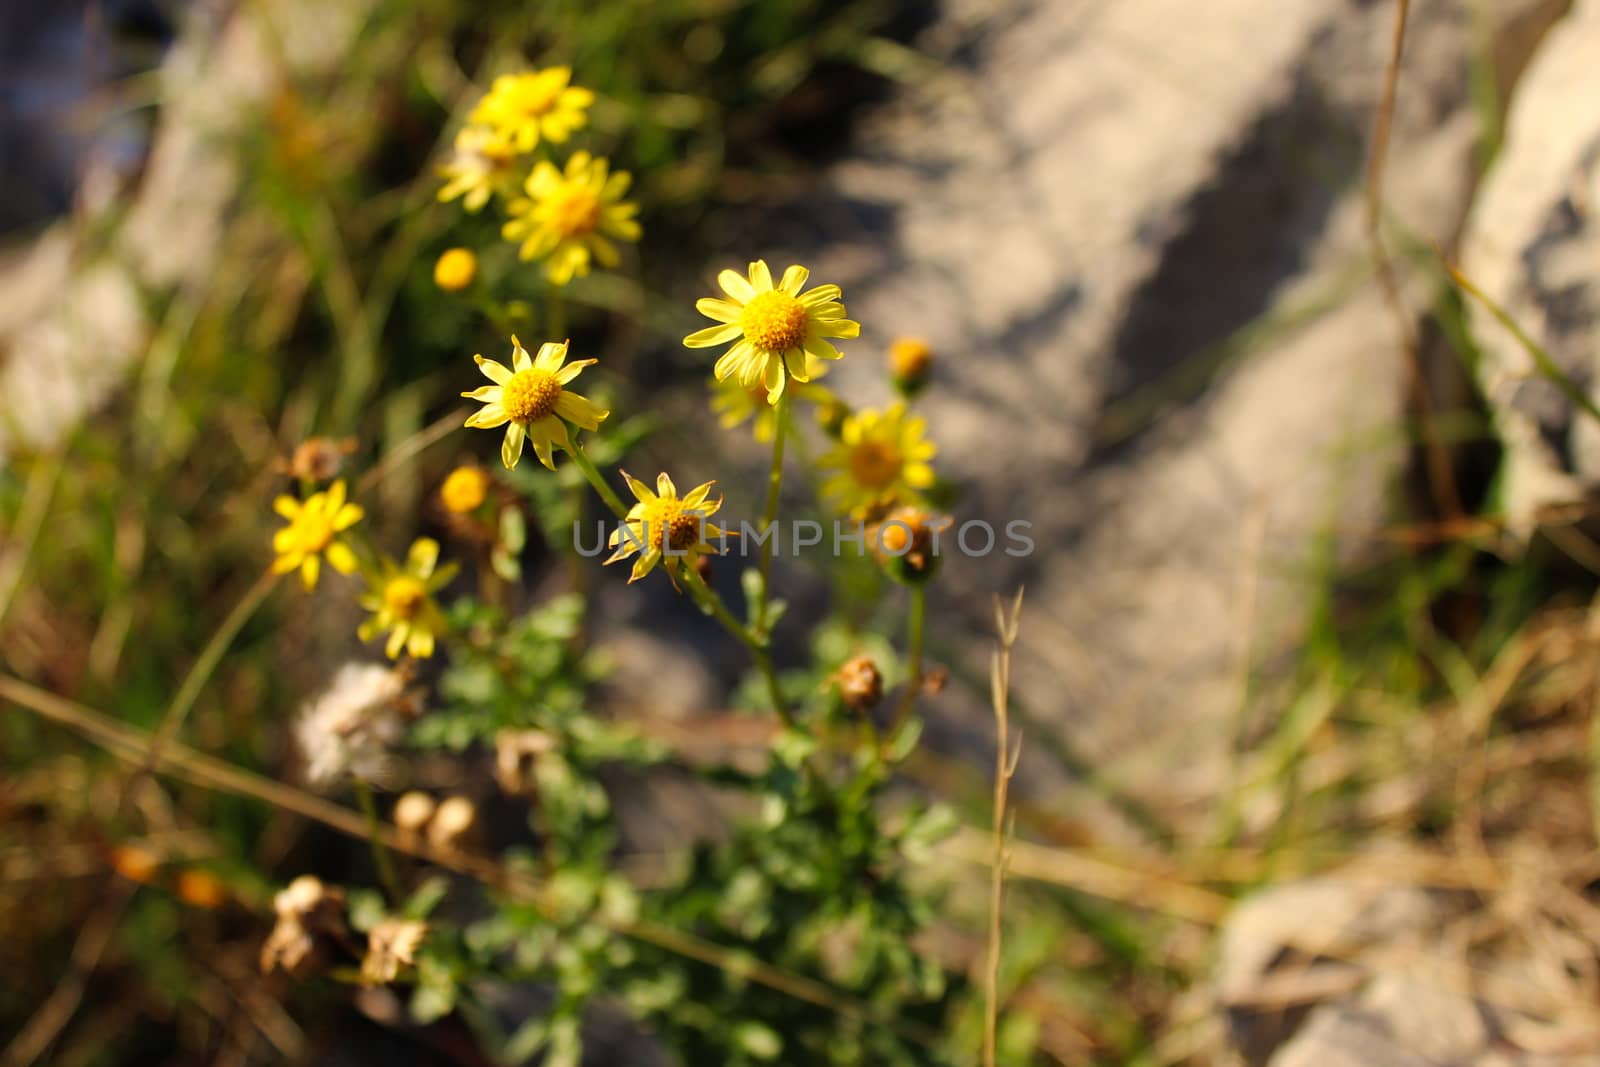 Beautiful yellow flowers from the Asteraceae family. On the mountain Bjelasnica, Bosnia and Herzegovina.